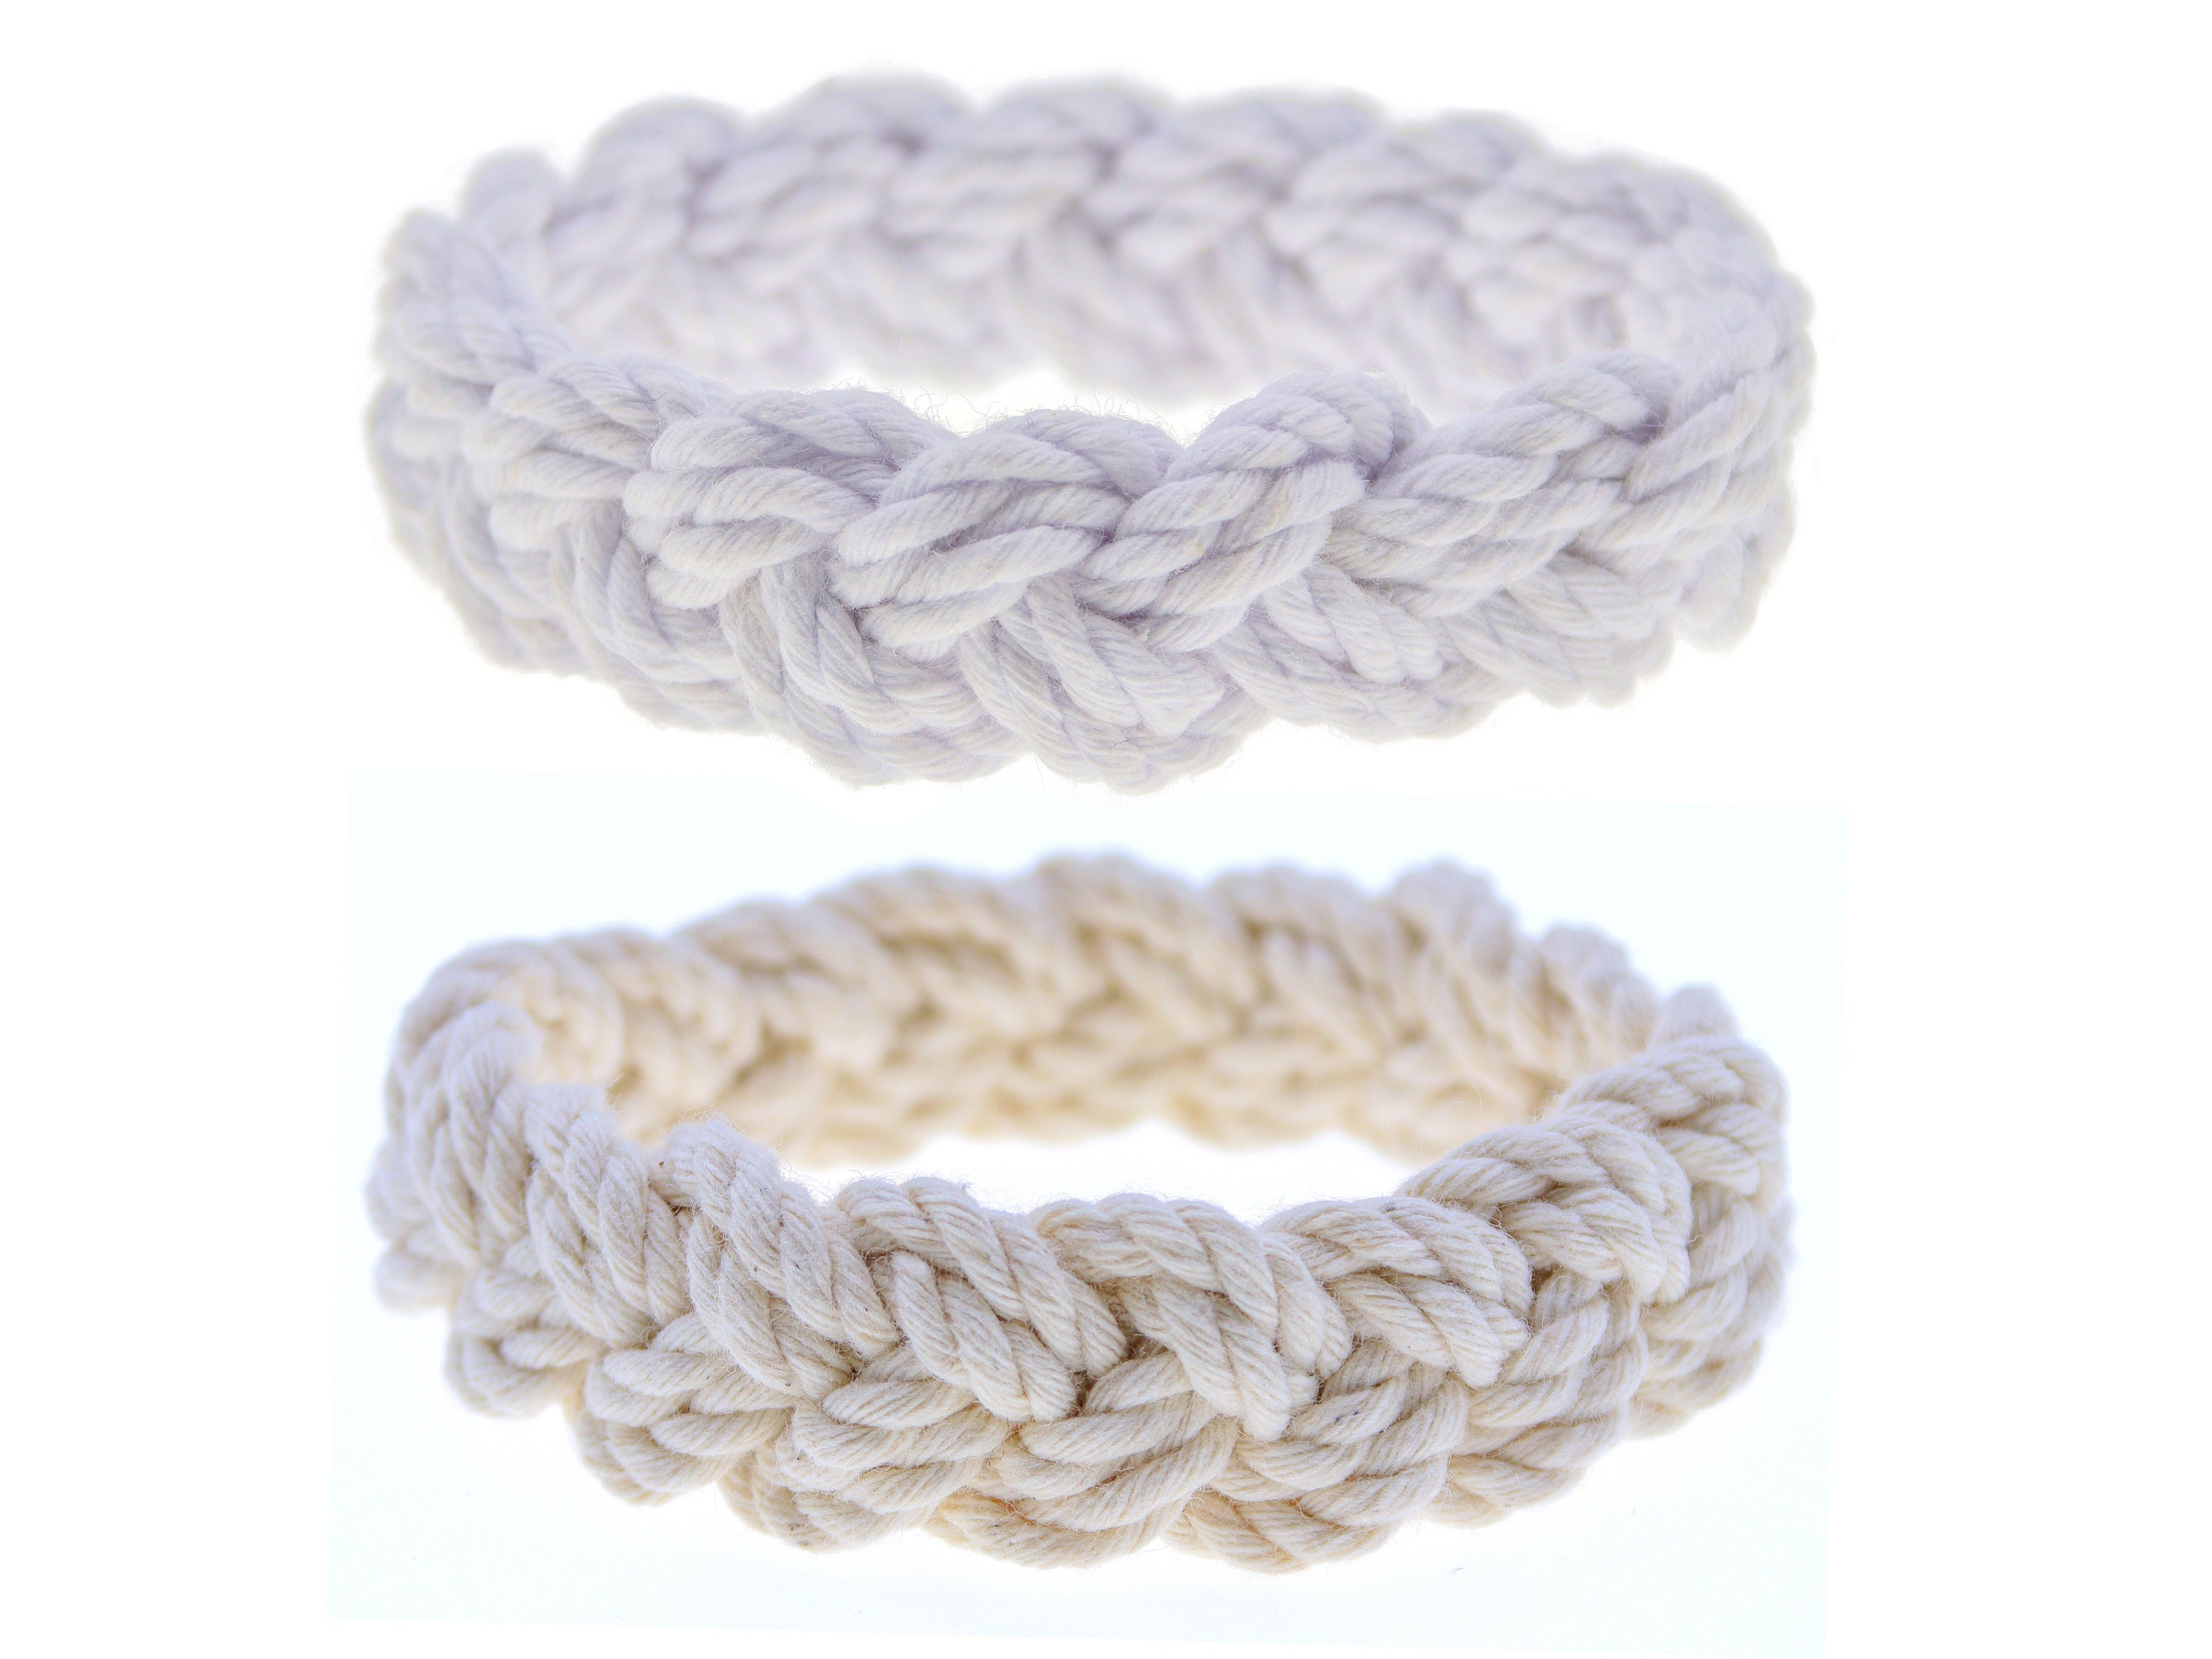 Classic Sailor's Bracelet | Shipped from USA LG